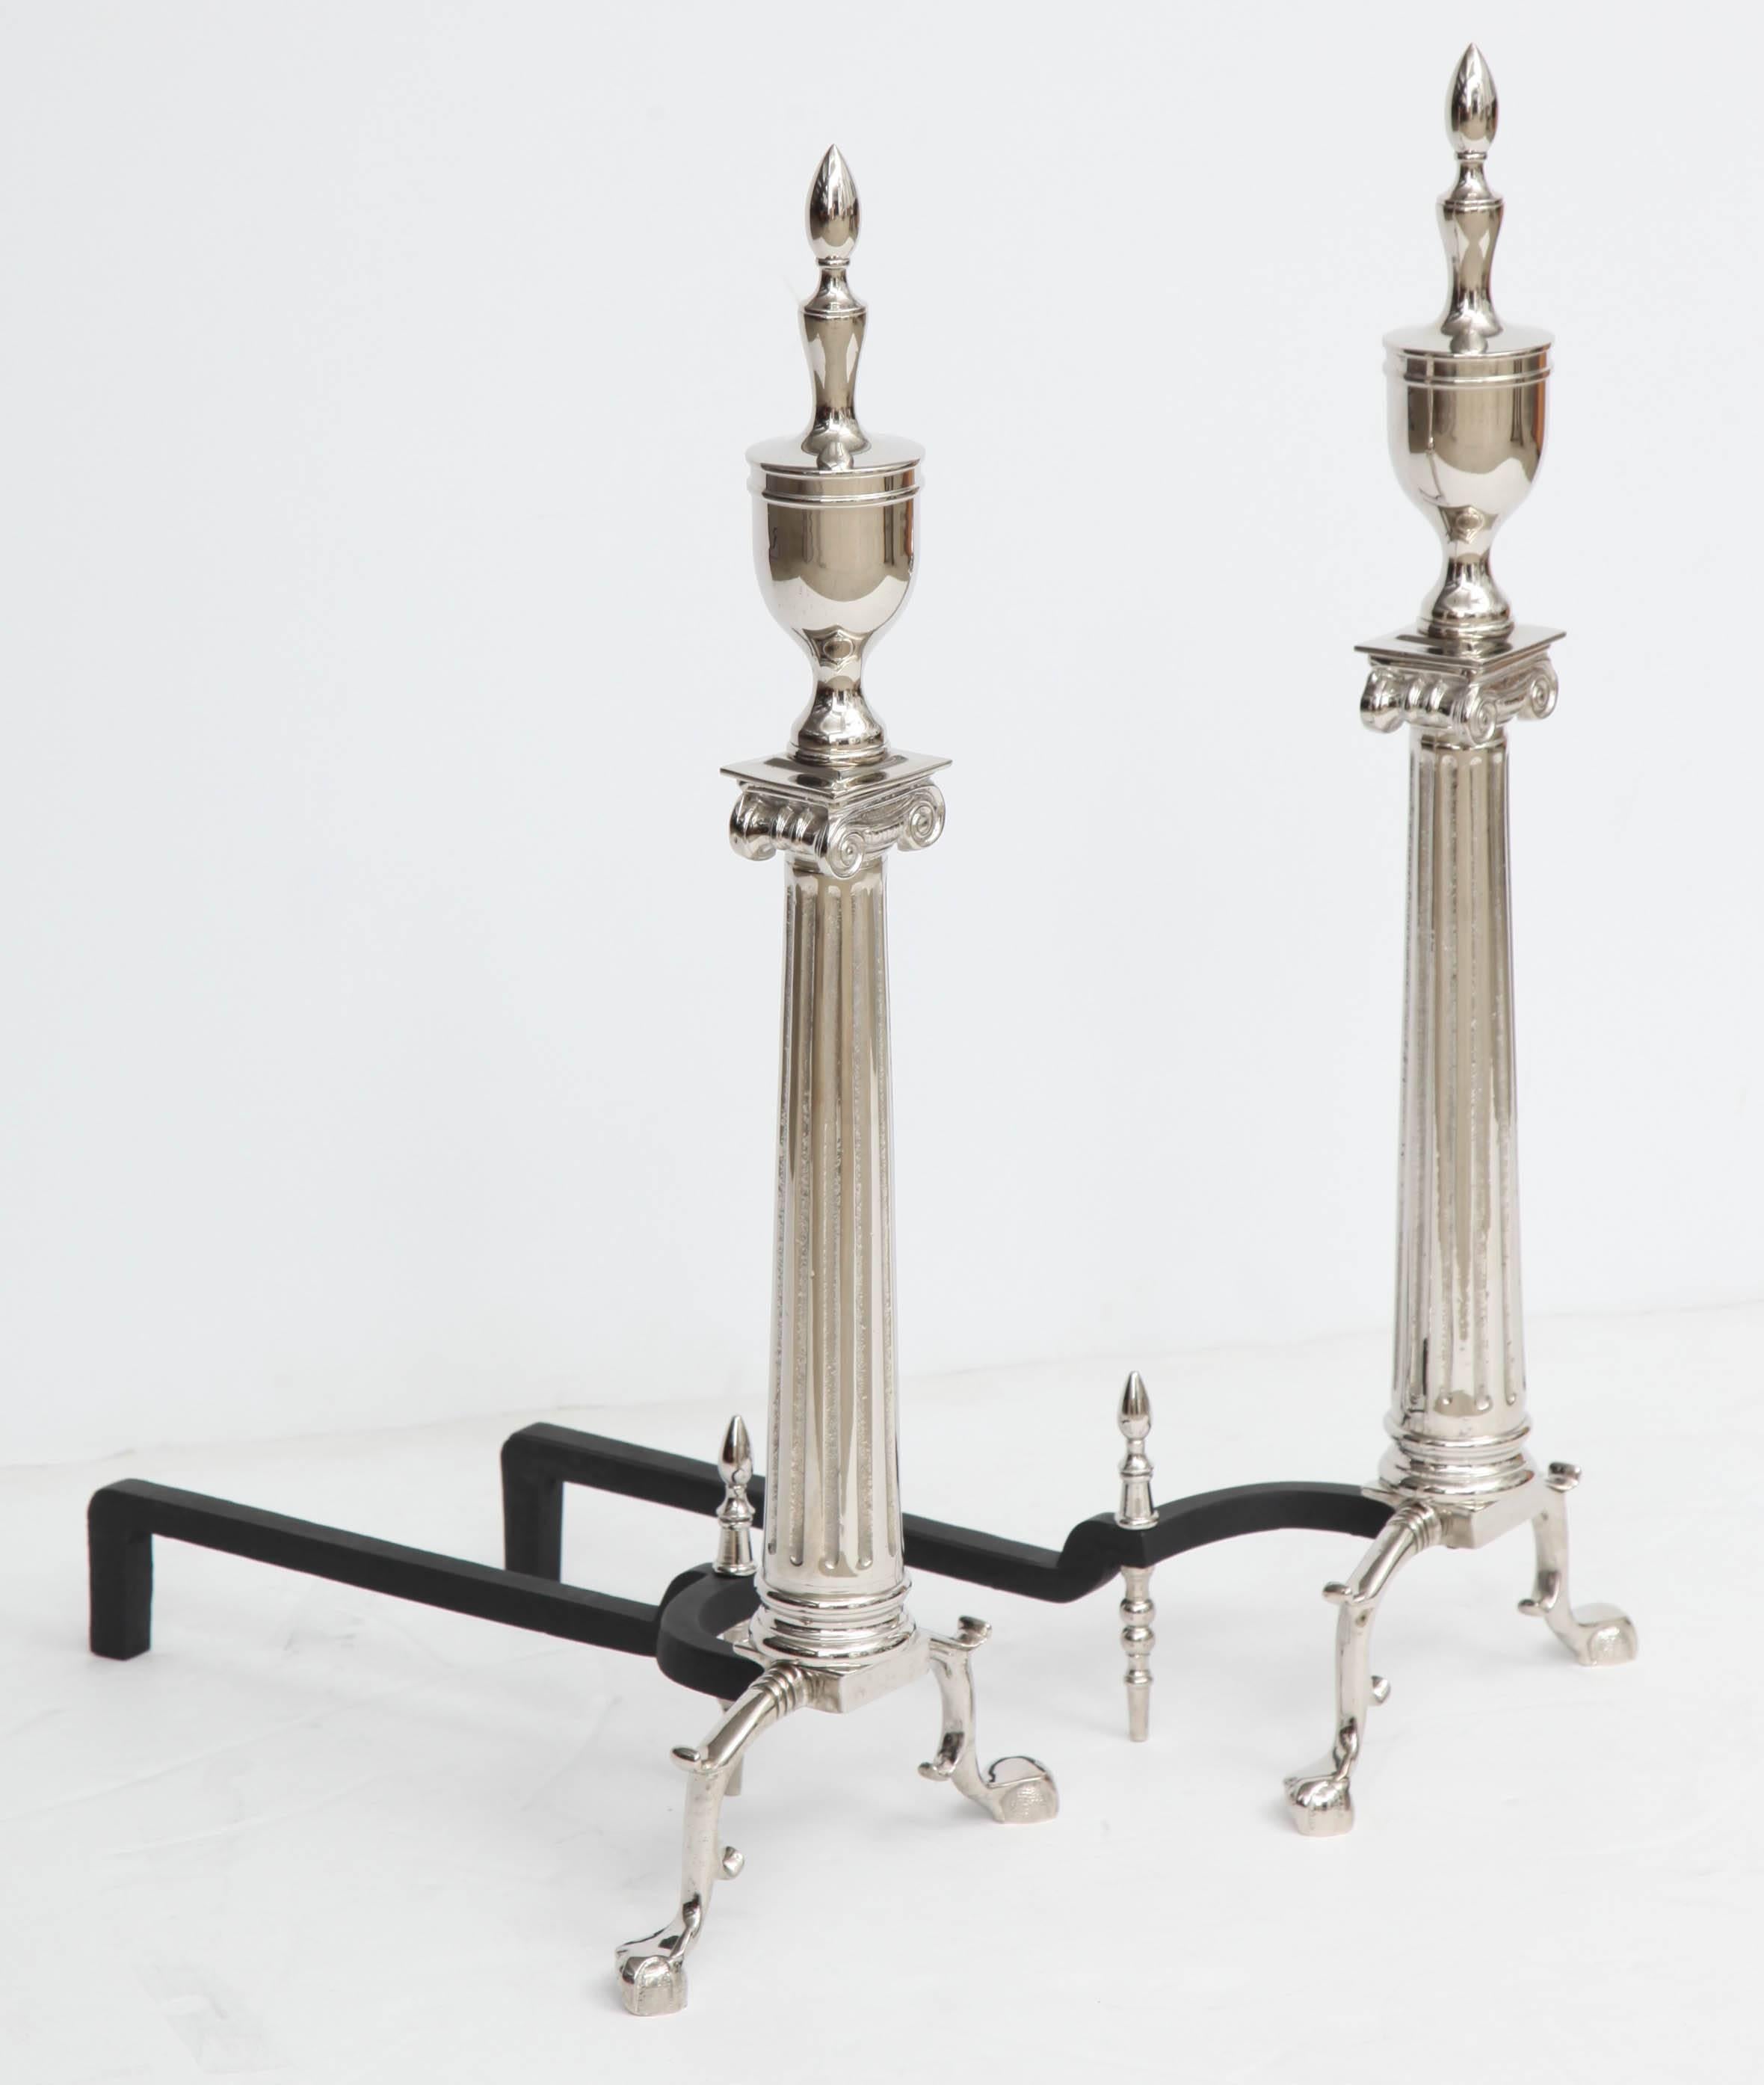 Pair of grand polished nickel andirons with a traditional ionic column form with a stately urn finial.